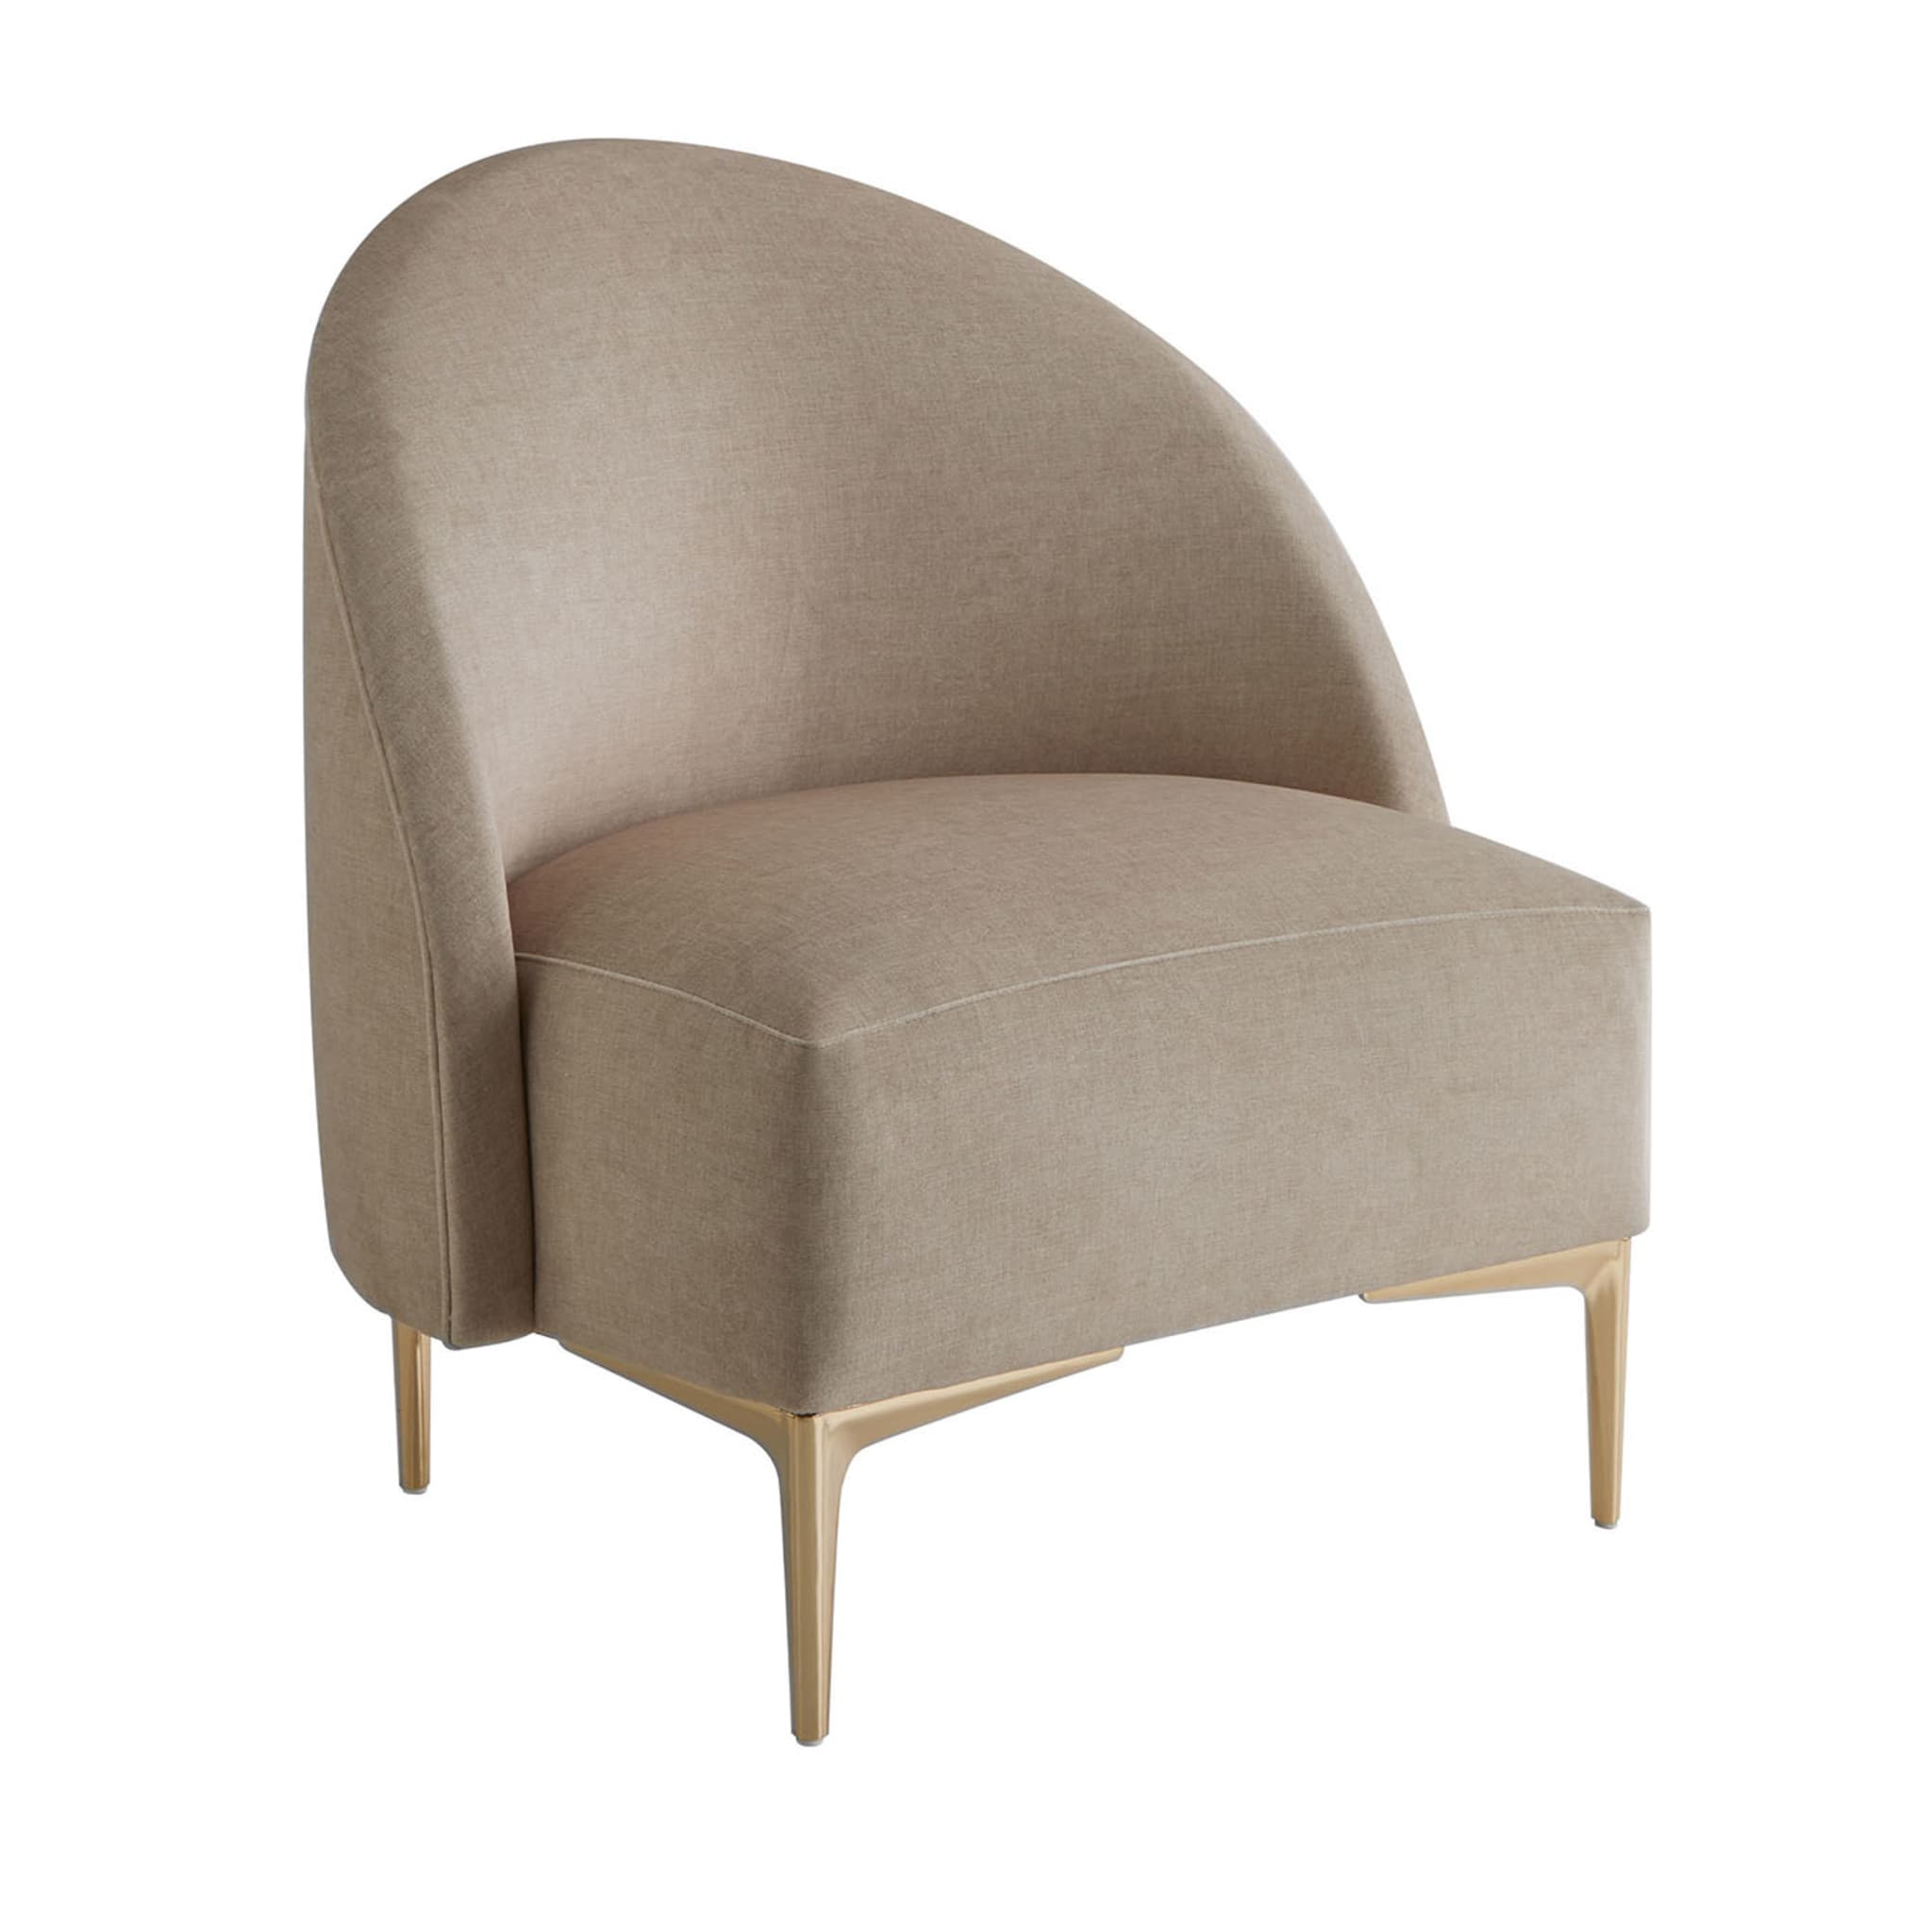 Audrie Lounge Chair - Main view